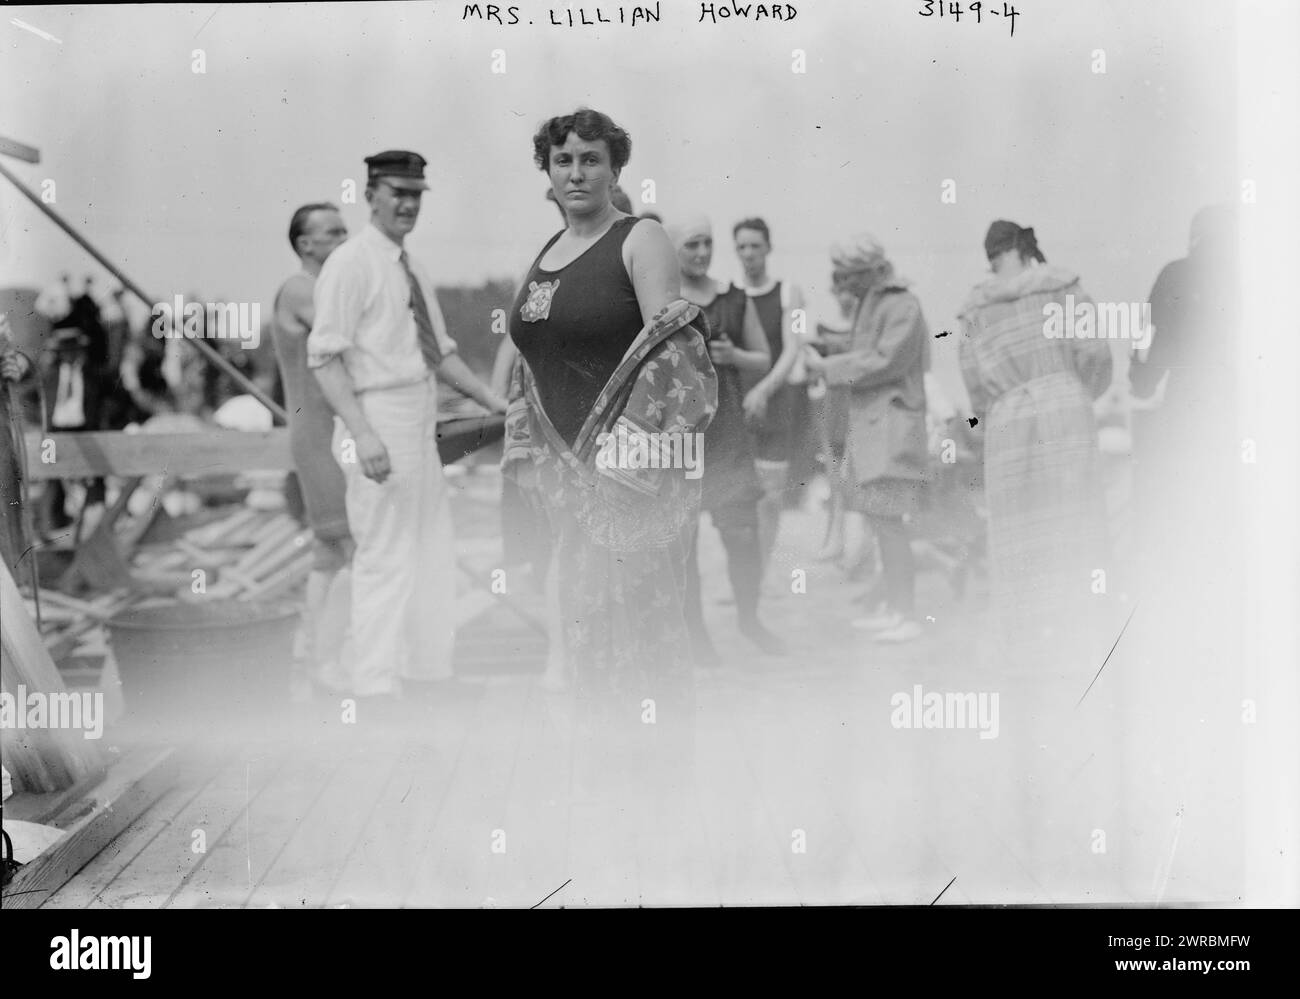 Mrs. Lillian Howard, Photograph shows Mrs. Lillian Howard, an officer in the Women's National Life Saving Society/League from 1913-1914 at a women's swimming contest at Sheepshead Bay, Brooklyn, New York City, July 16, 1914., 1914 July 16, Glass negatives, 1 negative: glass Stock Photo